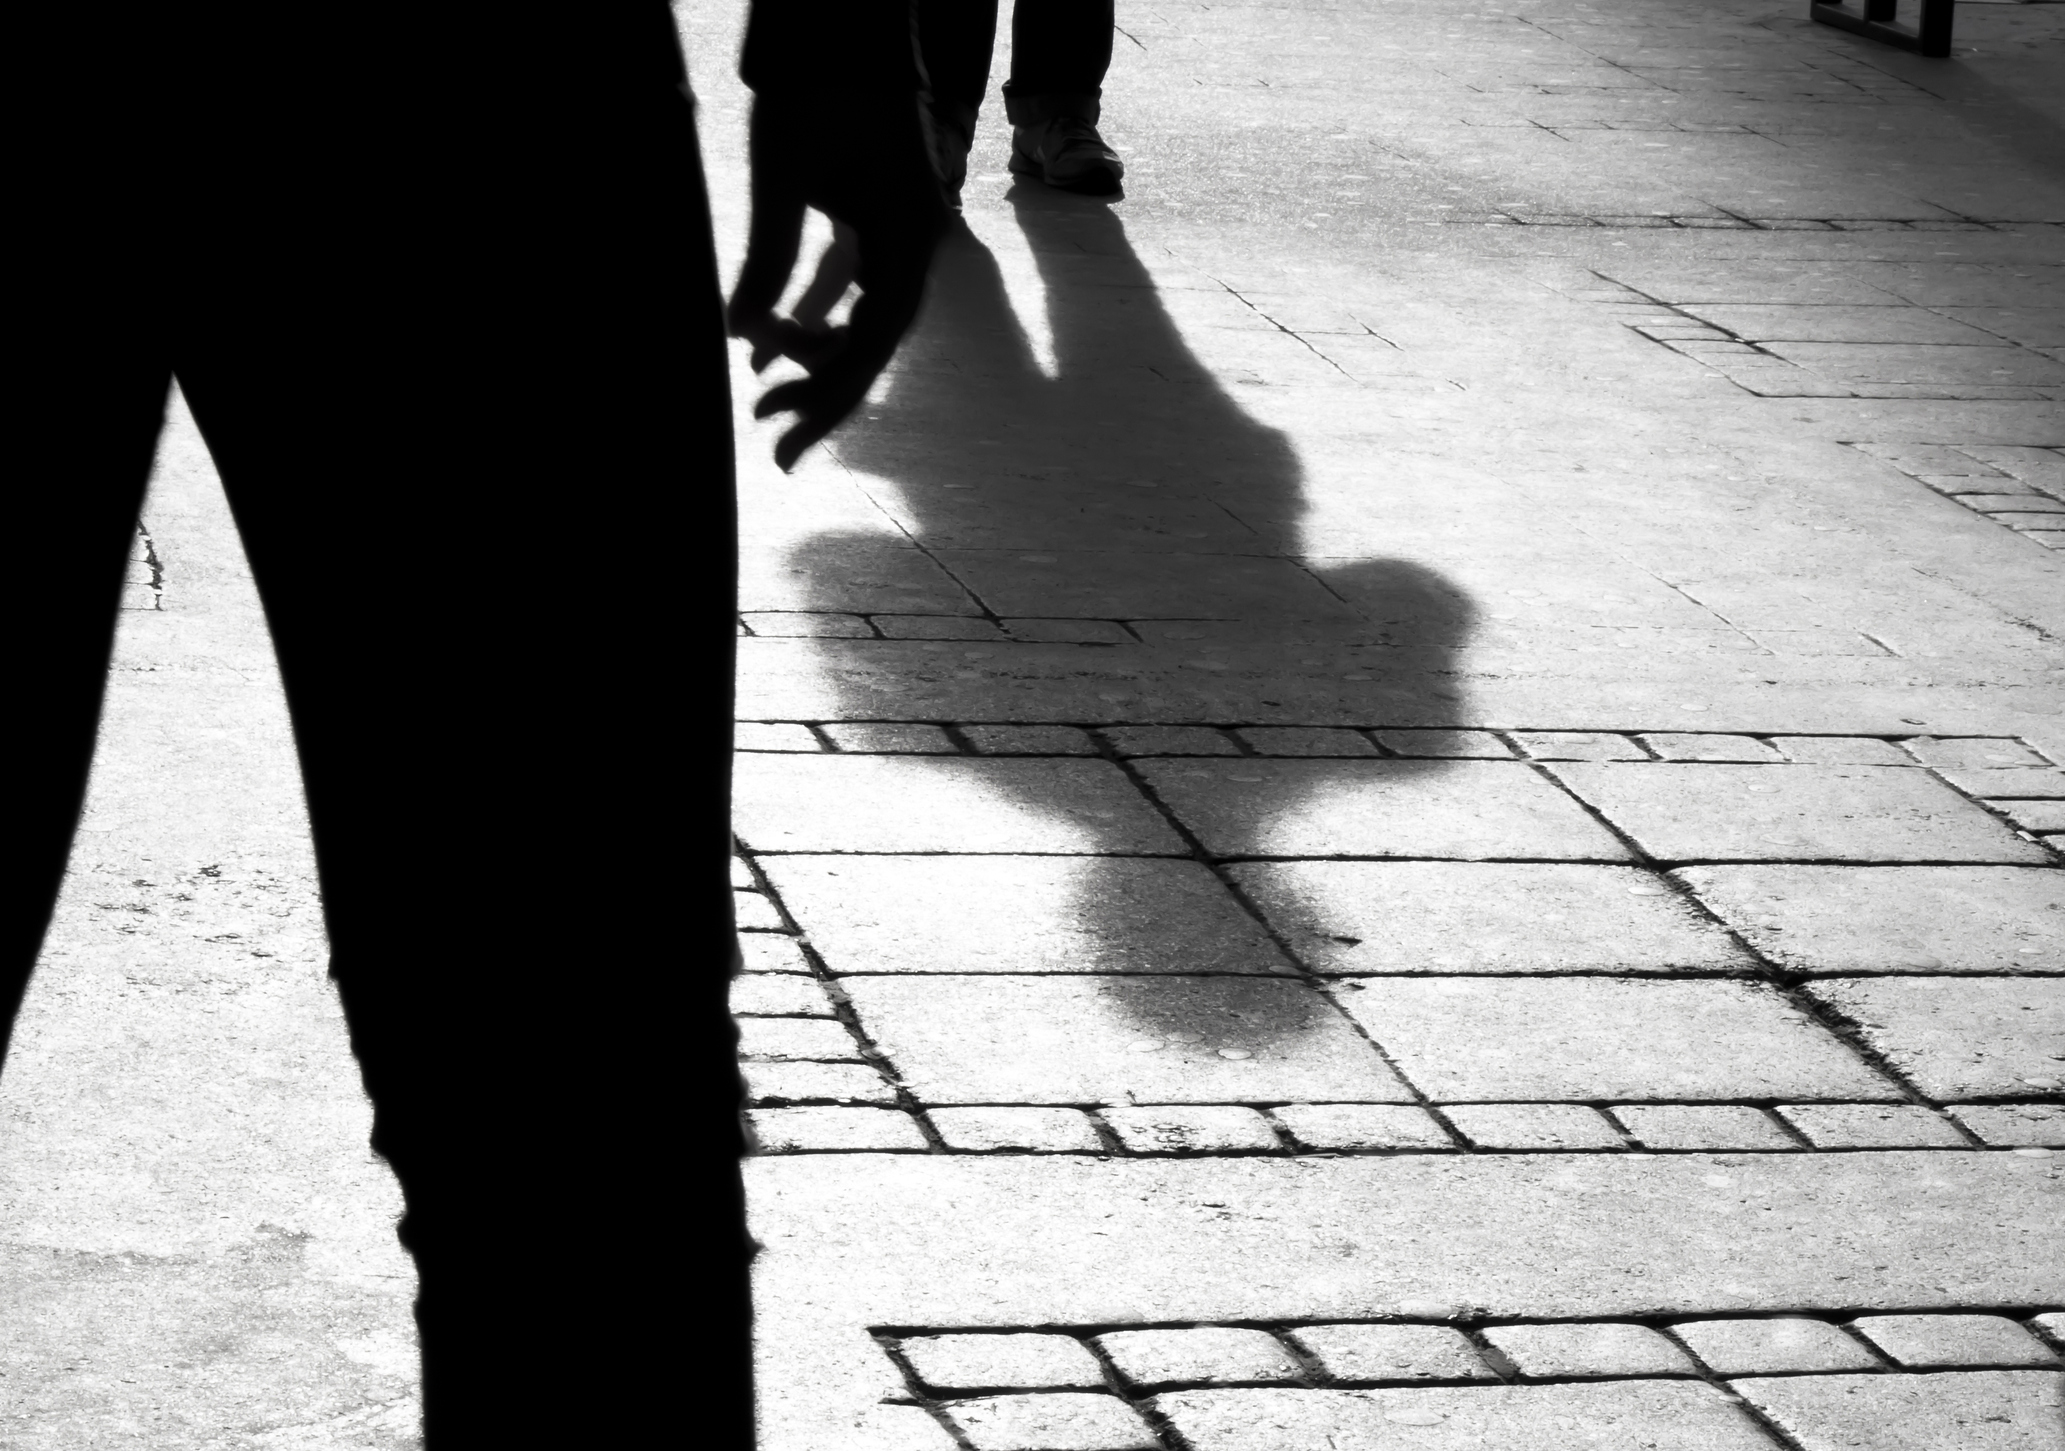 Shadow silhouette of two person on city sidewalk in black and white